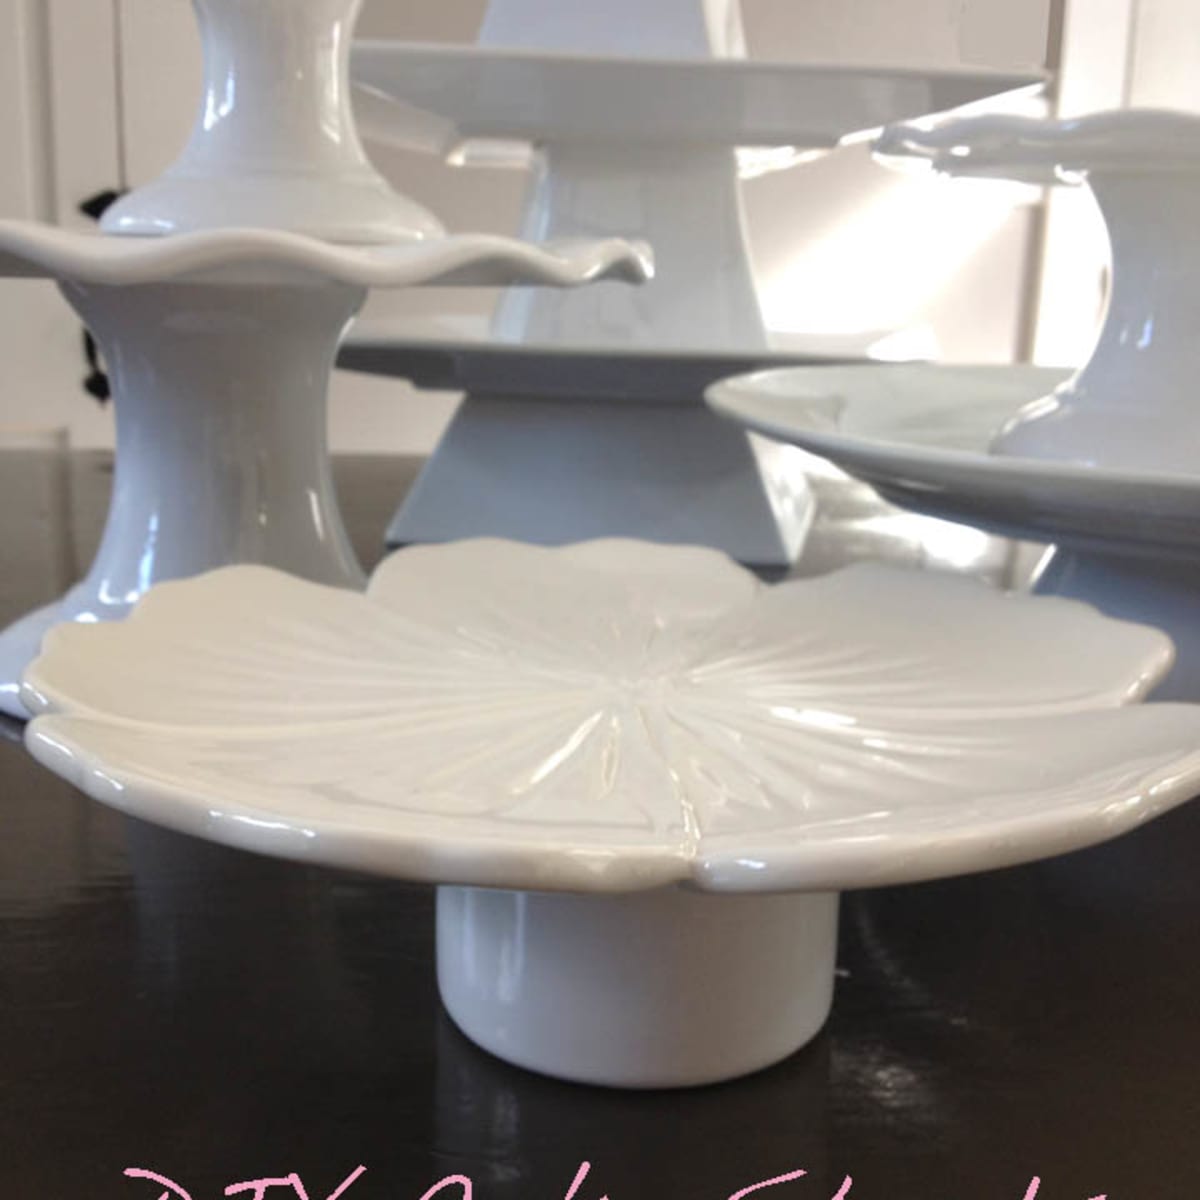 Cake stand with dome vintage -  Italia